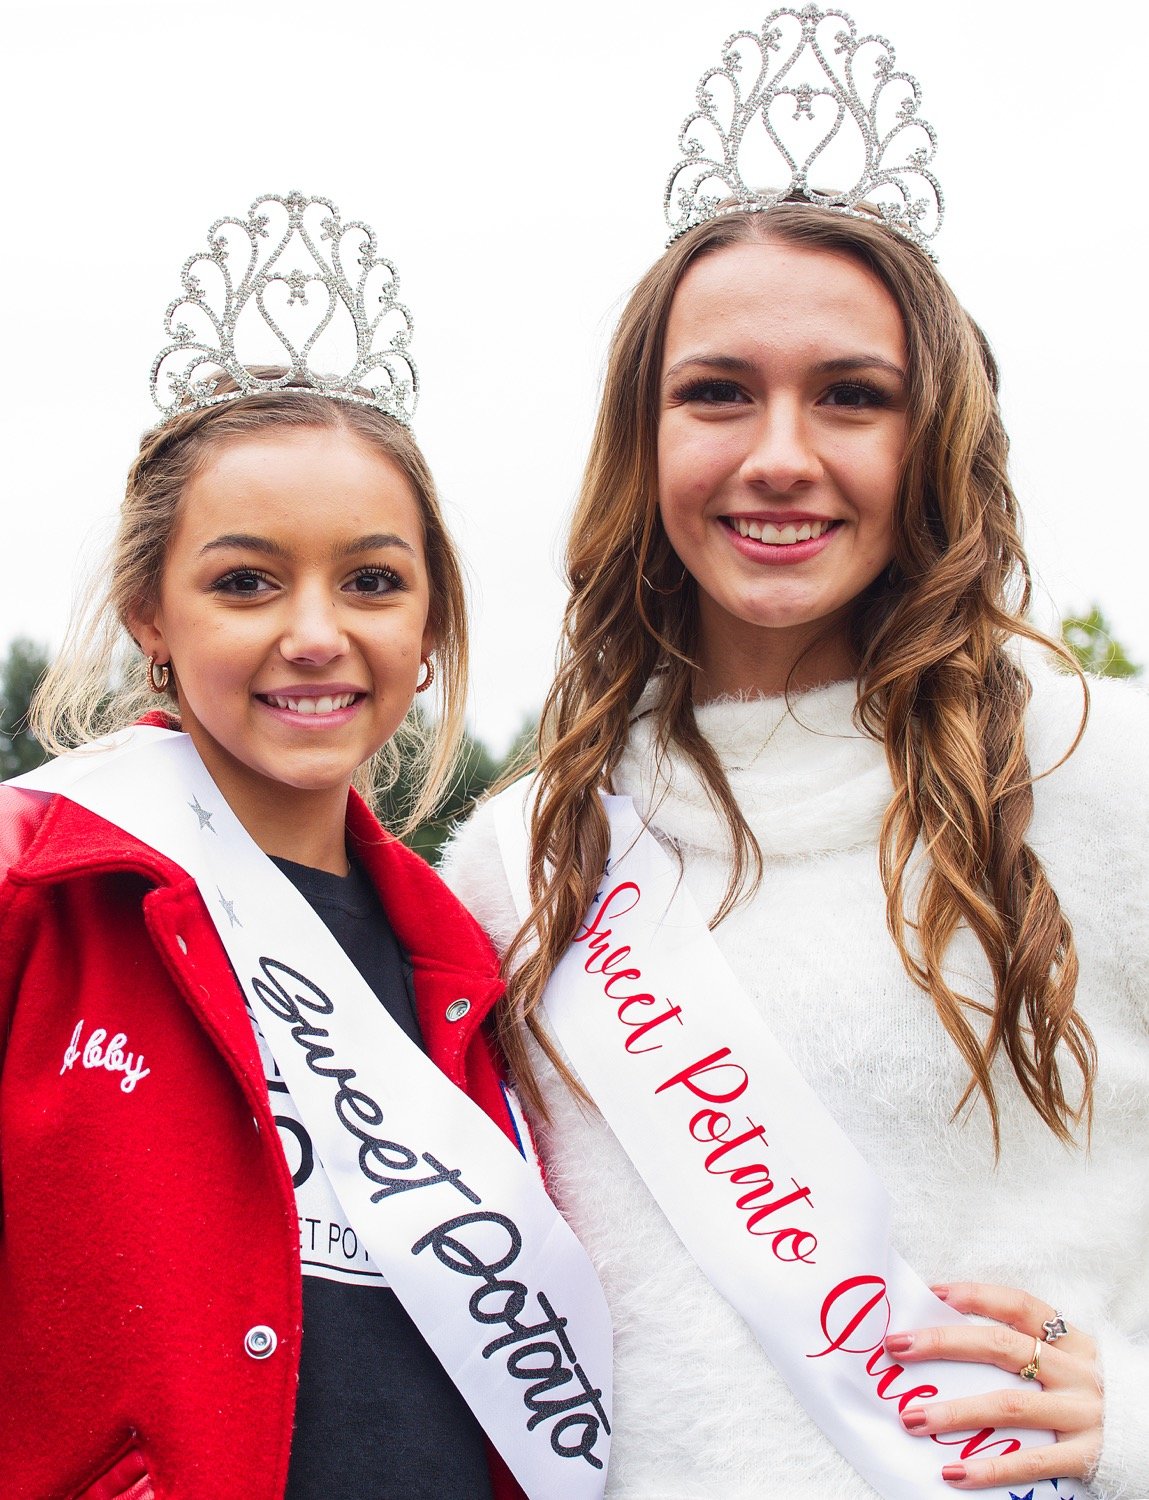 Abyy Hallman, 2020 Sweet Potato Queen (left) and Justina Peterson, 2019 recipient